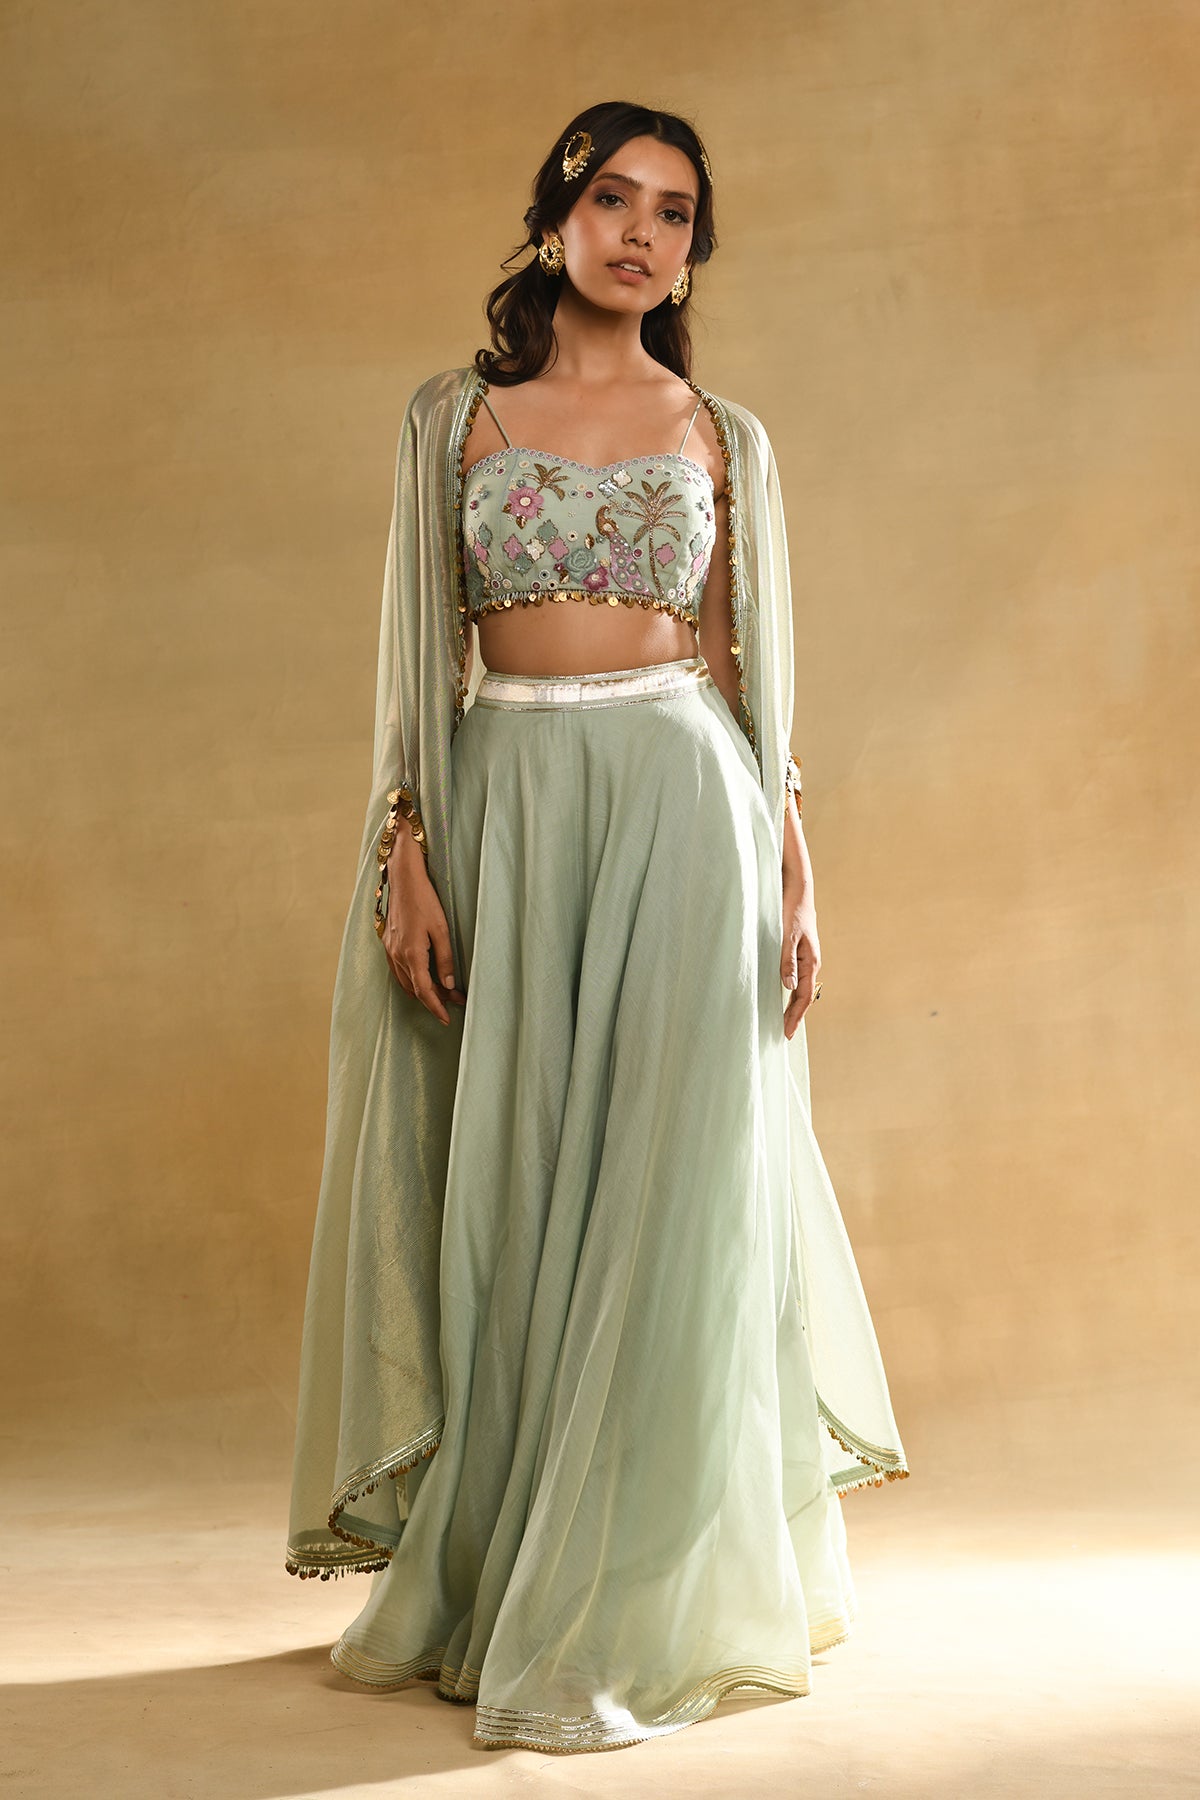 PALM TREE PEACOCK EMBROIDERED BUSTIER TEAL CAPE SET